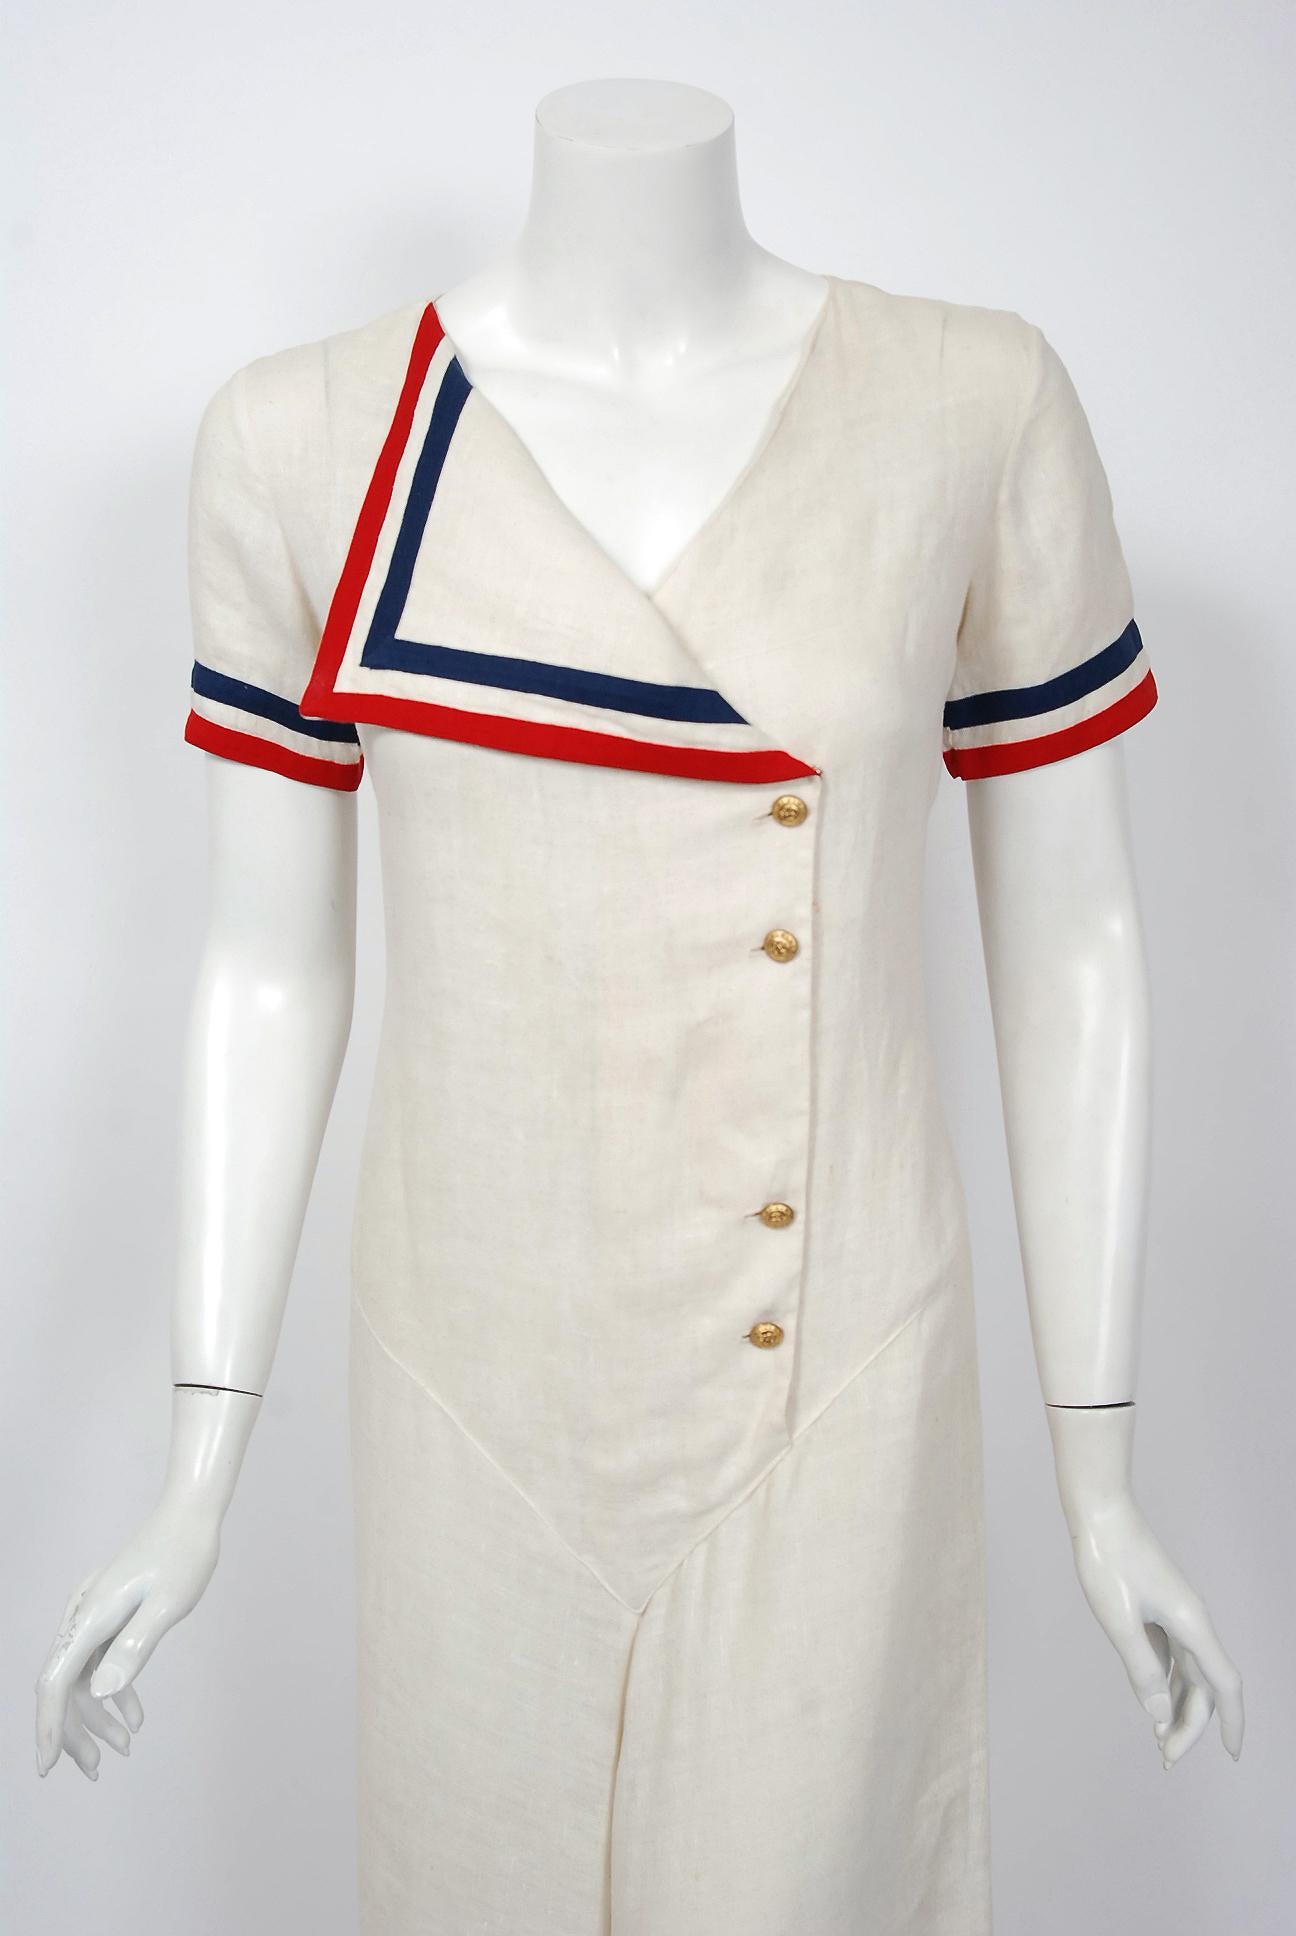 A breathtaking and rare nautical sailor ivory linen jumpsuit from the late 1930's Old Hollywood era of glamour. The bodice has a gorgeous off-center wide lapel with brass anchor motif buttons. I love the red and blue patriotic striped bands which